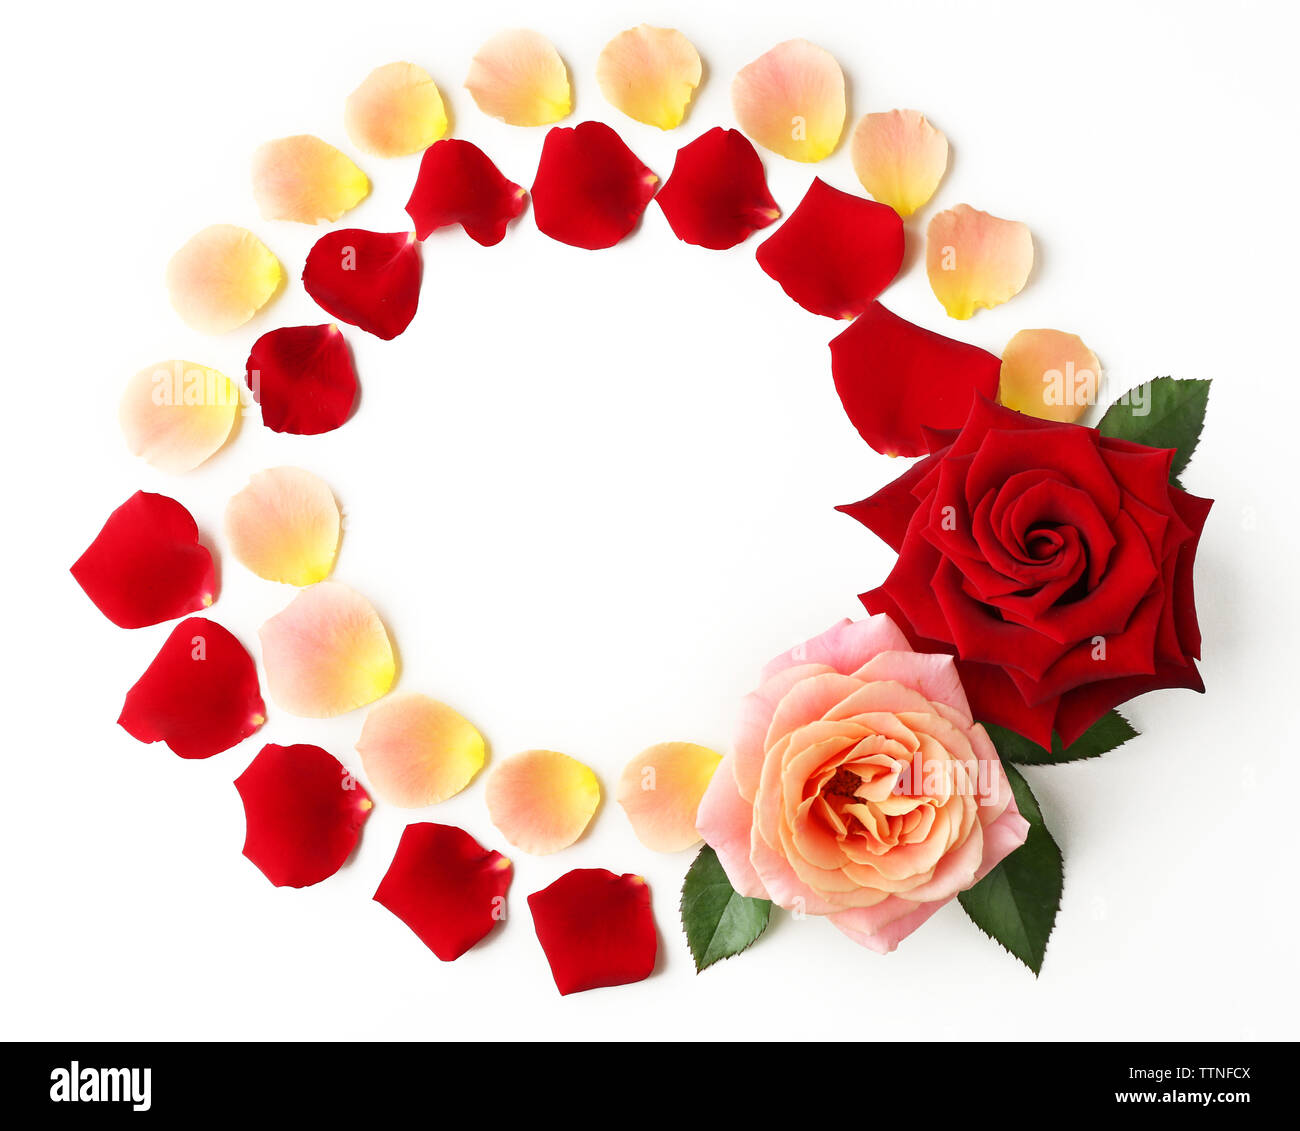 Rose petals on white background Stock Photo